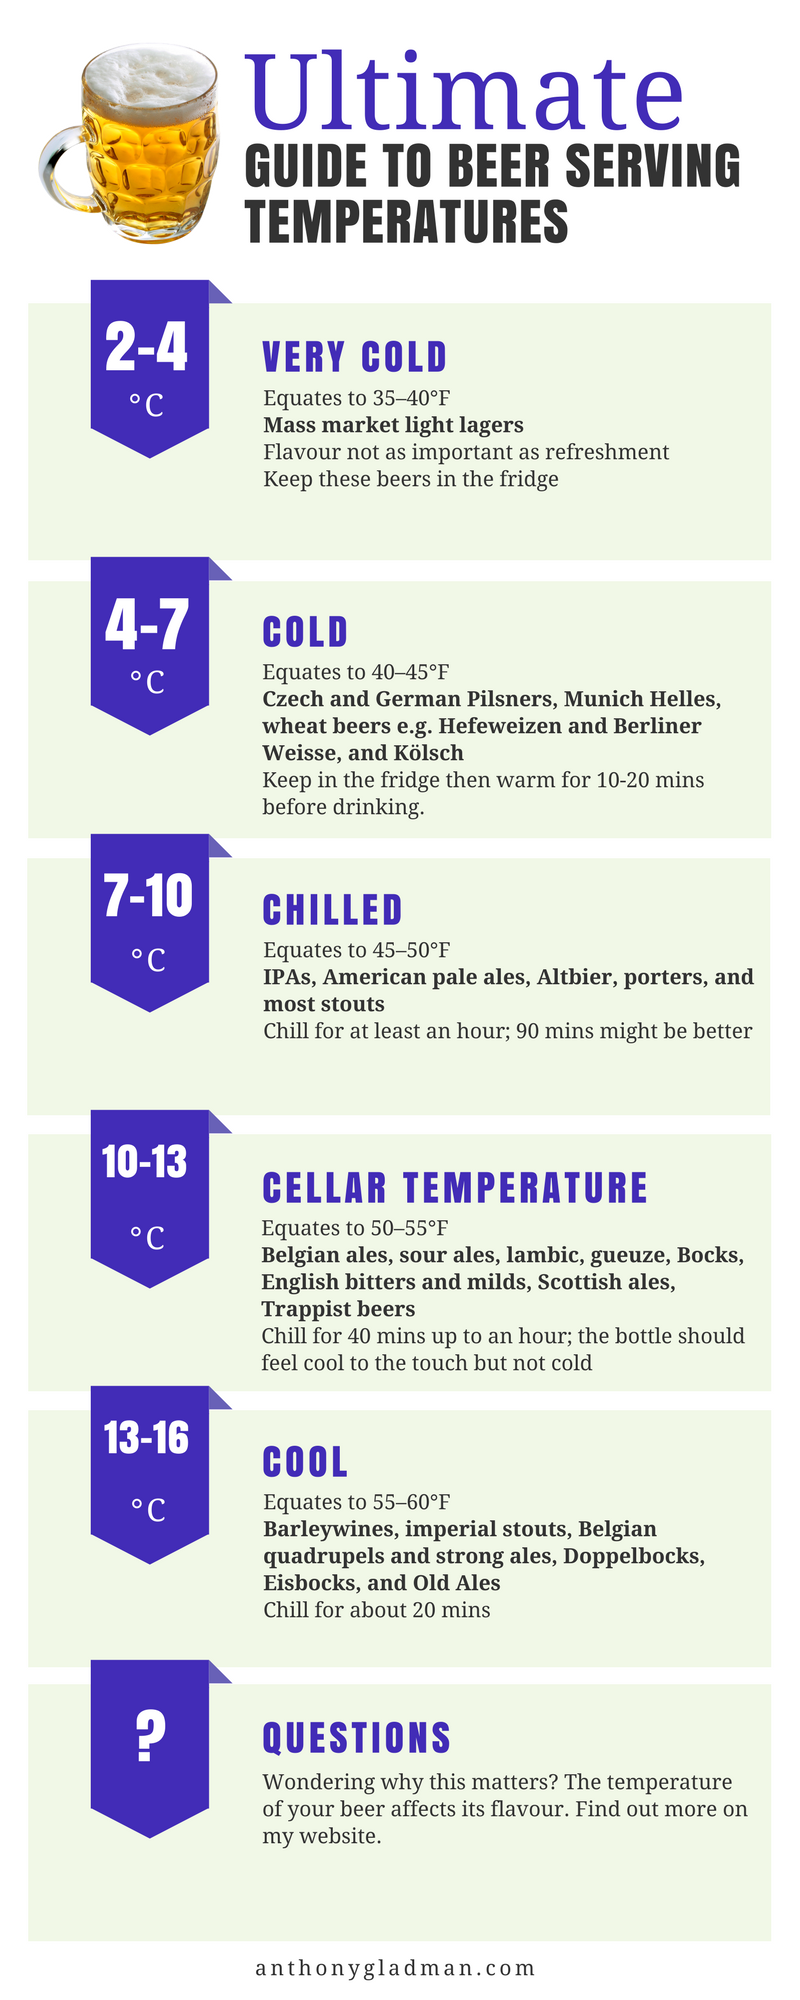 Beer Temperature Matters. If you chill your beer too much it… | by Anthony  Gladman | Medium